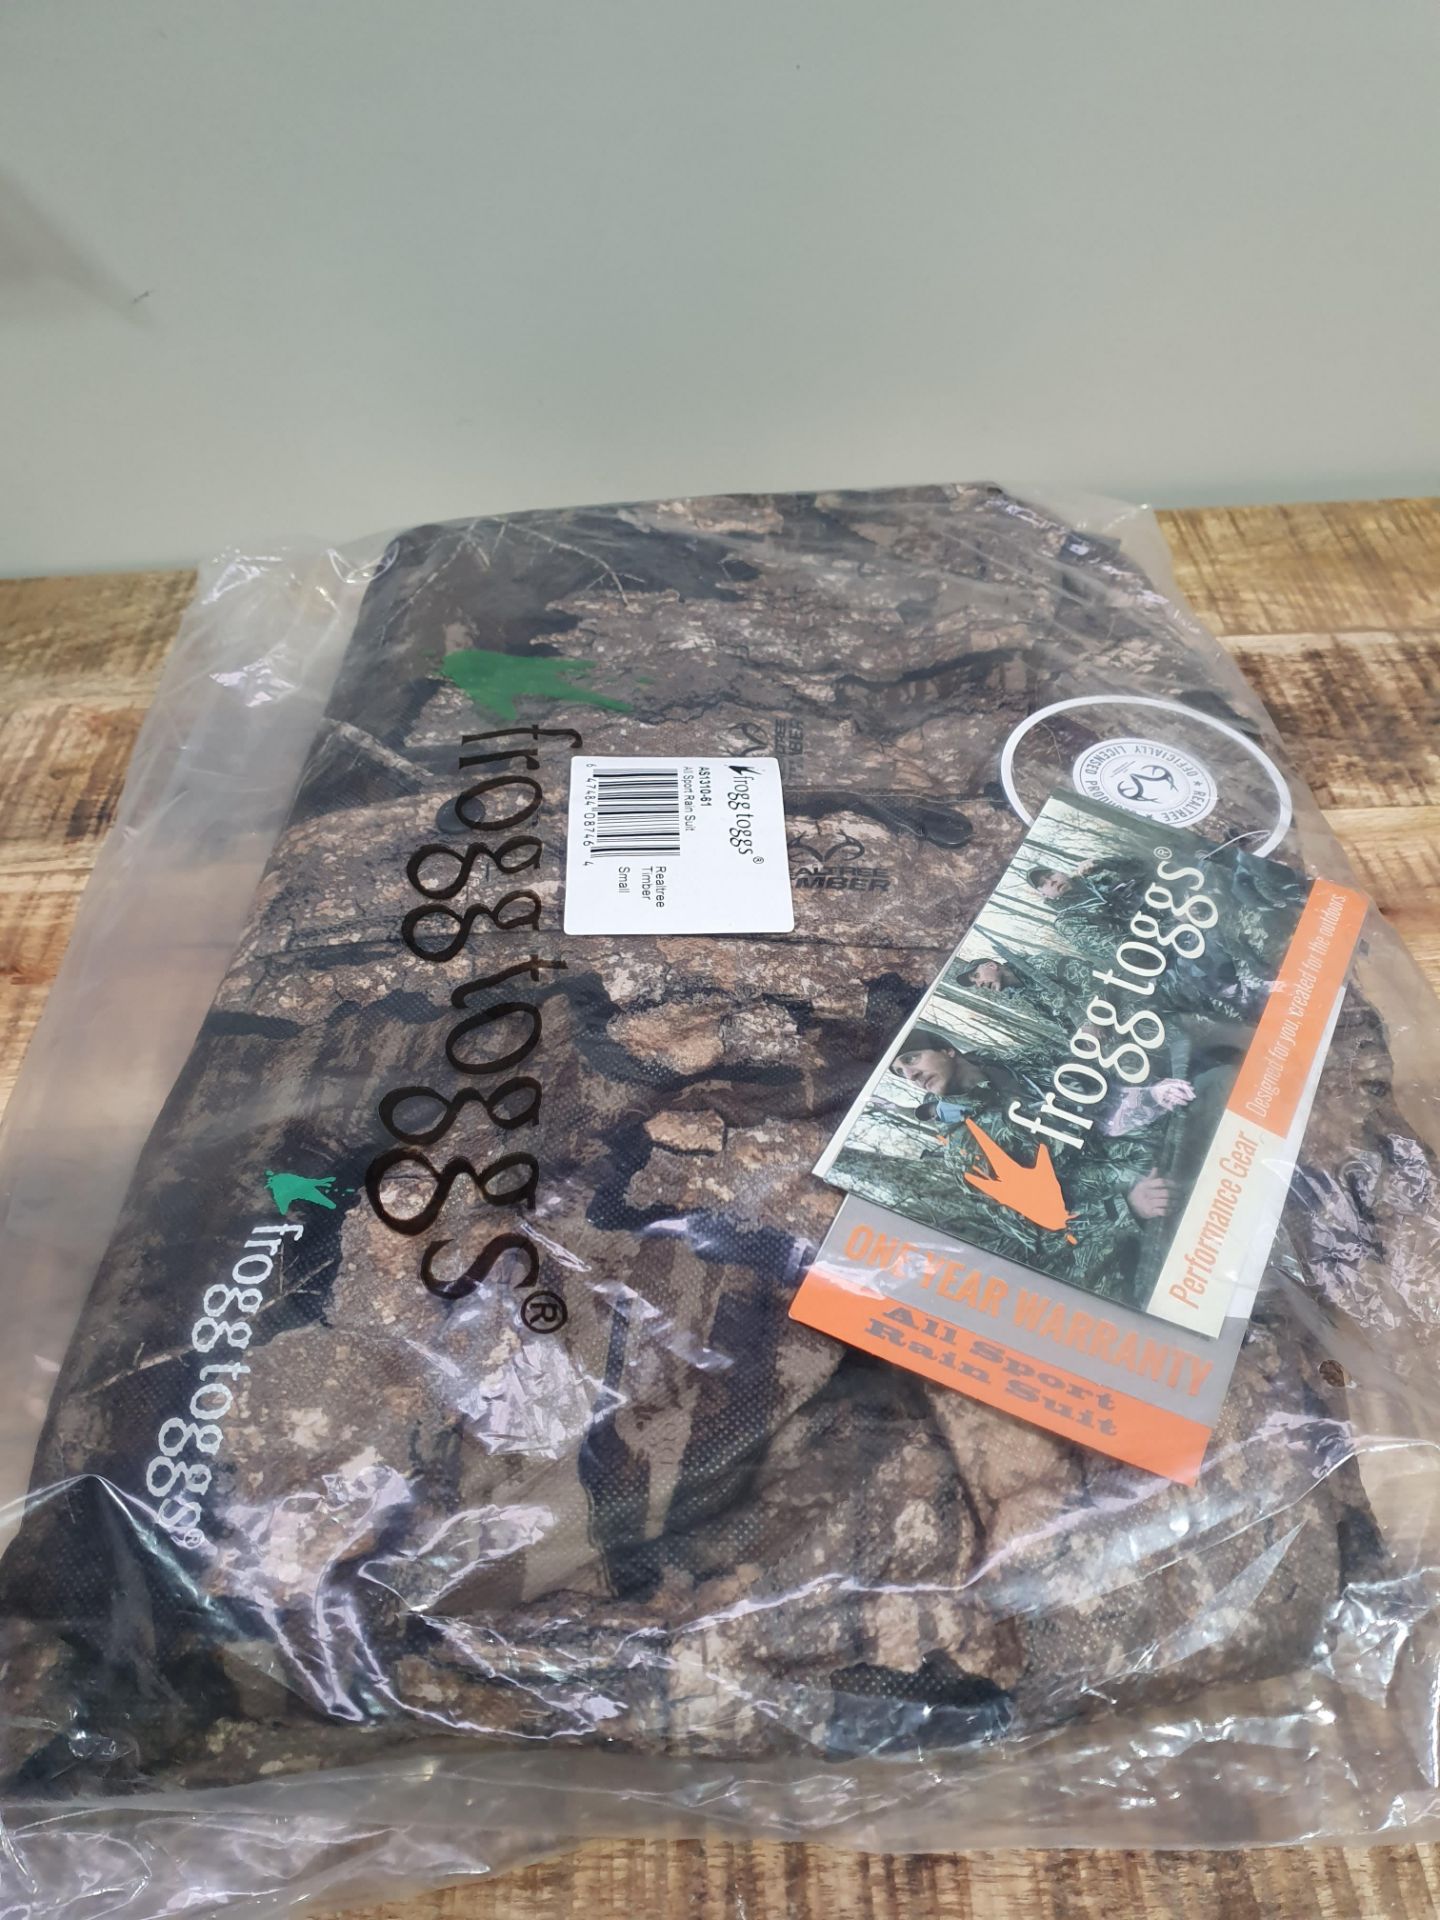 FROGG TOGG ALL SPORT RAIN SUIT REALTREE TIMBER SIZE SMALL RRP £40